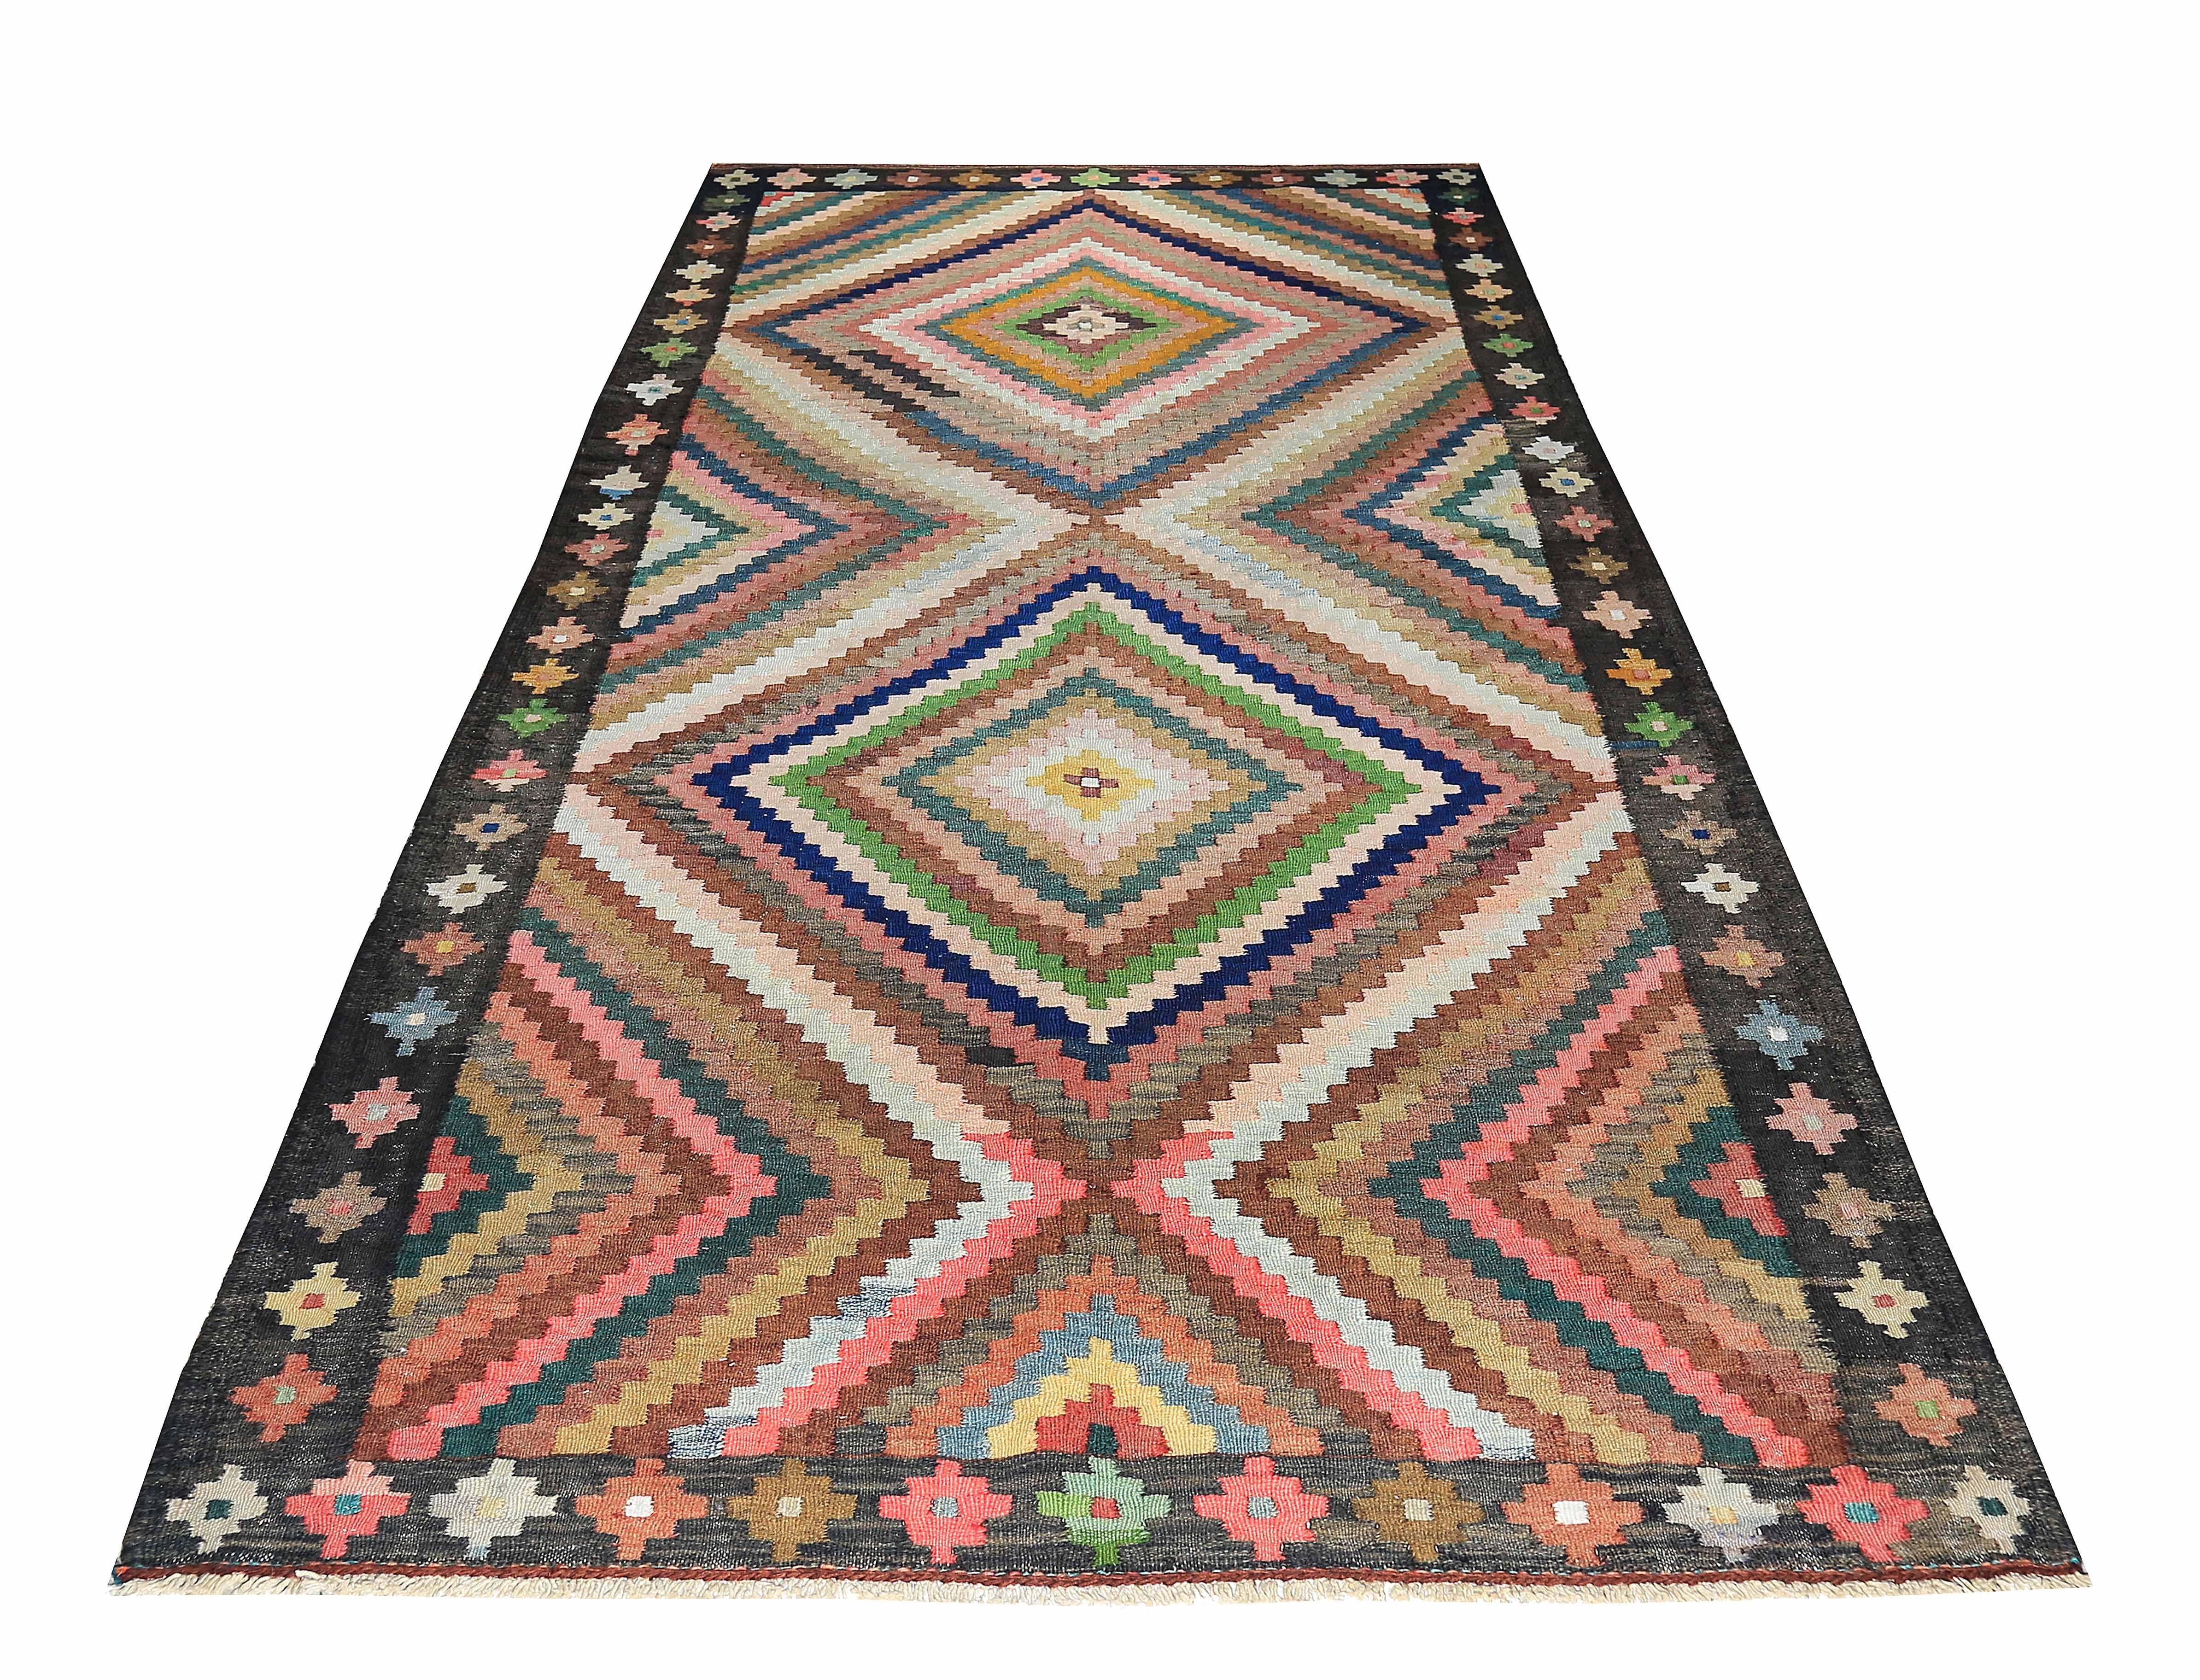 Turkish rug handwoven from the finest sheep’s wool and colored with all-natural vegetable dyes that are safe for humans and pets. It’s a traditional Kilim flat-weave design featuring vibrant colors of tribal medallions and patterns. It’s a stunning